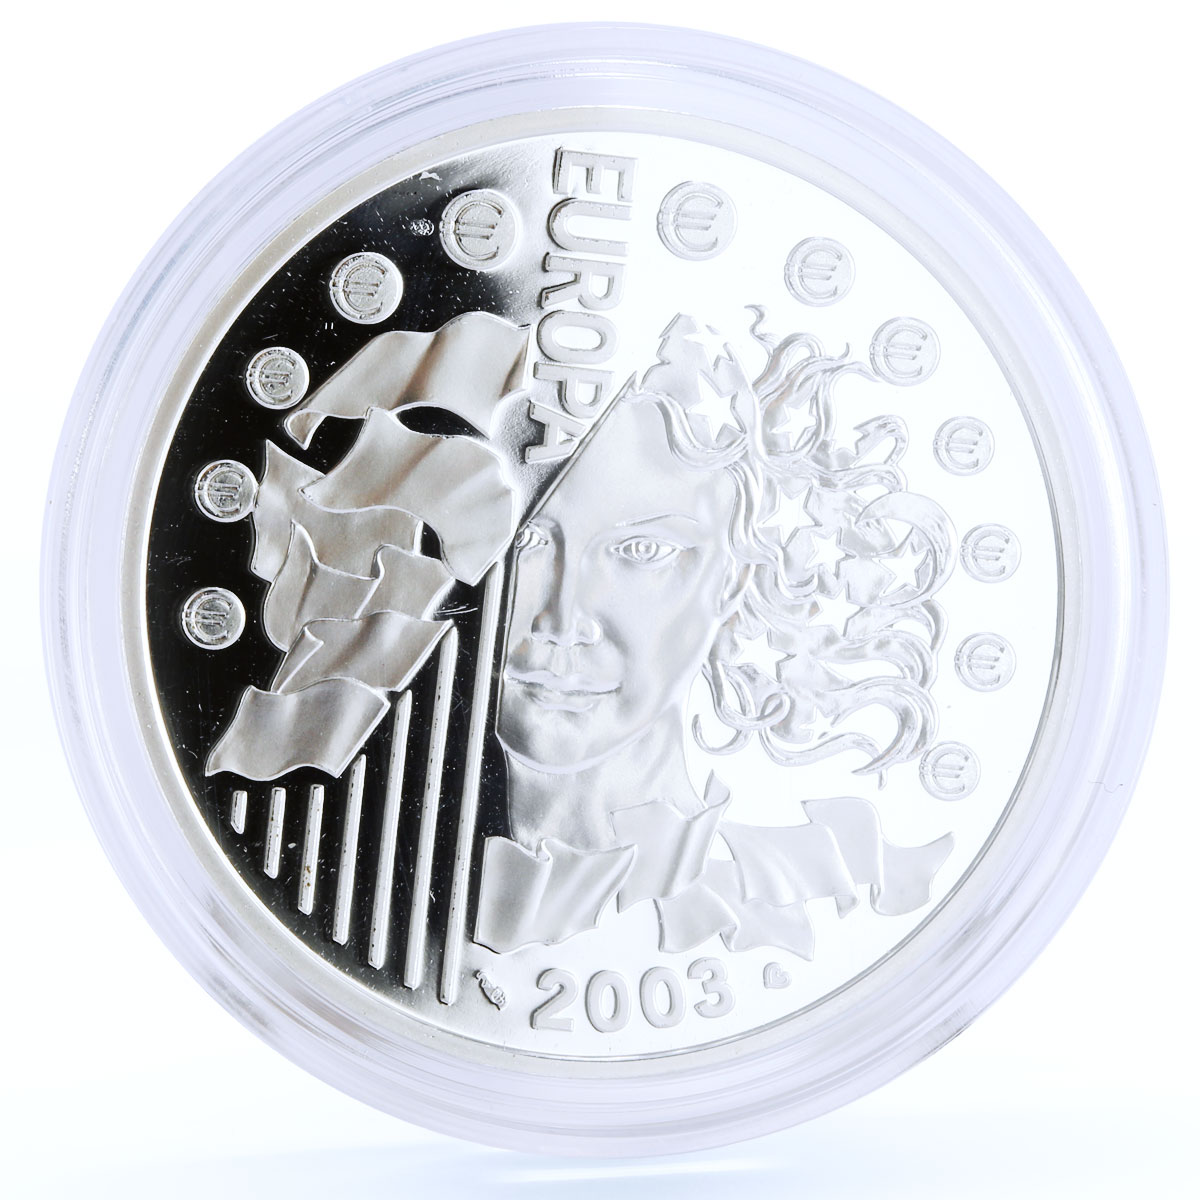 France 1 1/2 euro Introduction of the Euro Woman Flags proof silver coin 2003